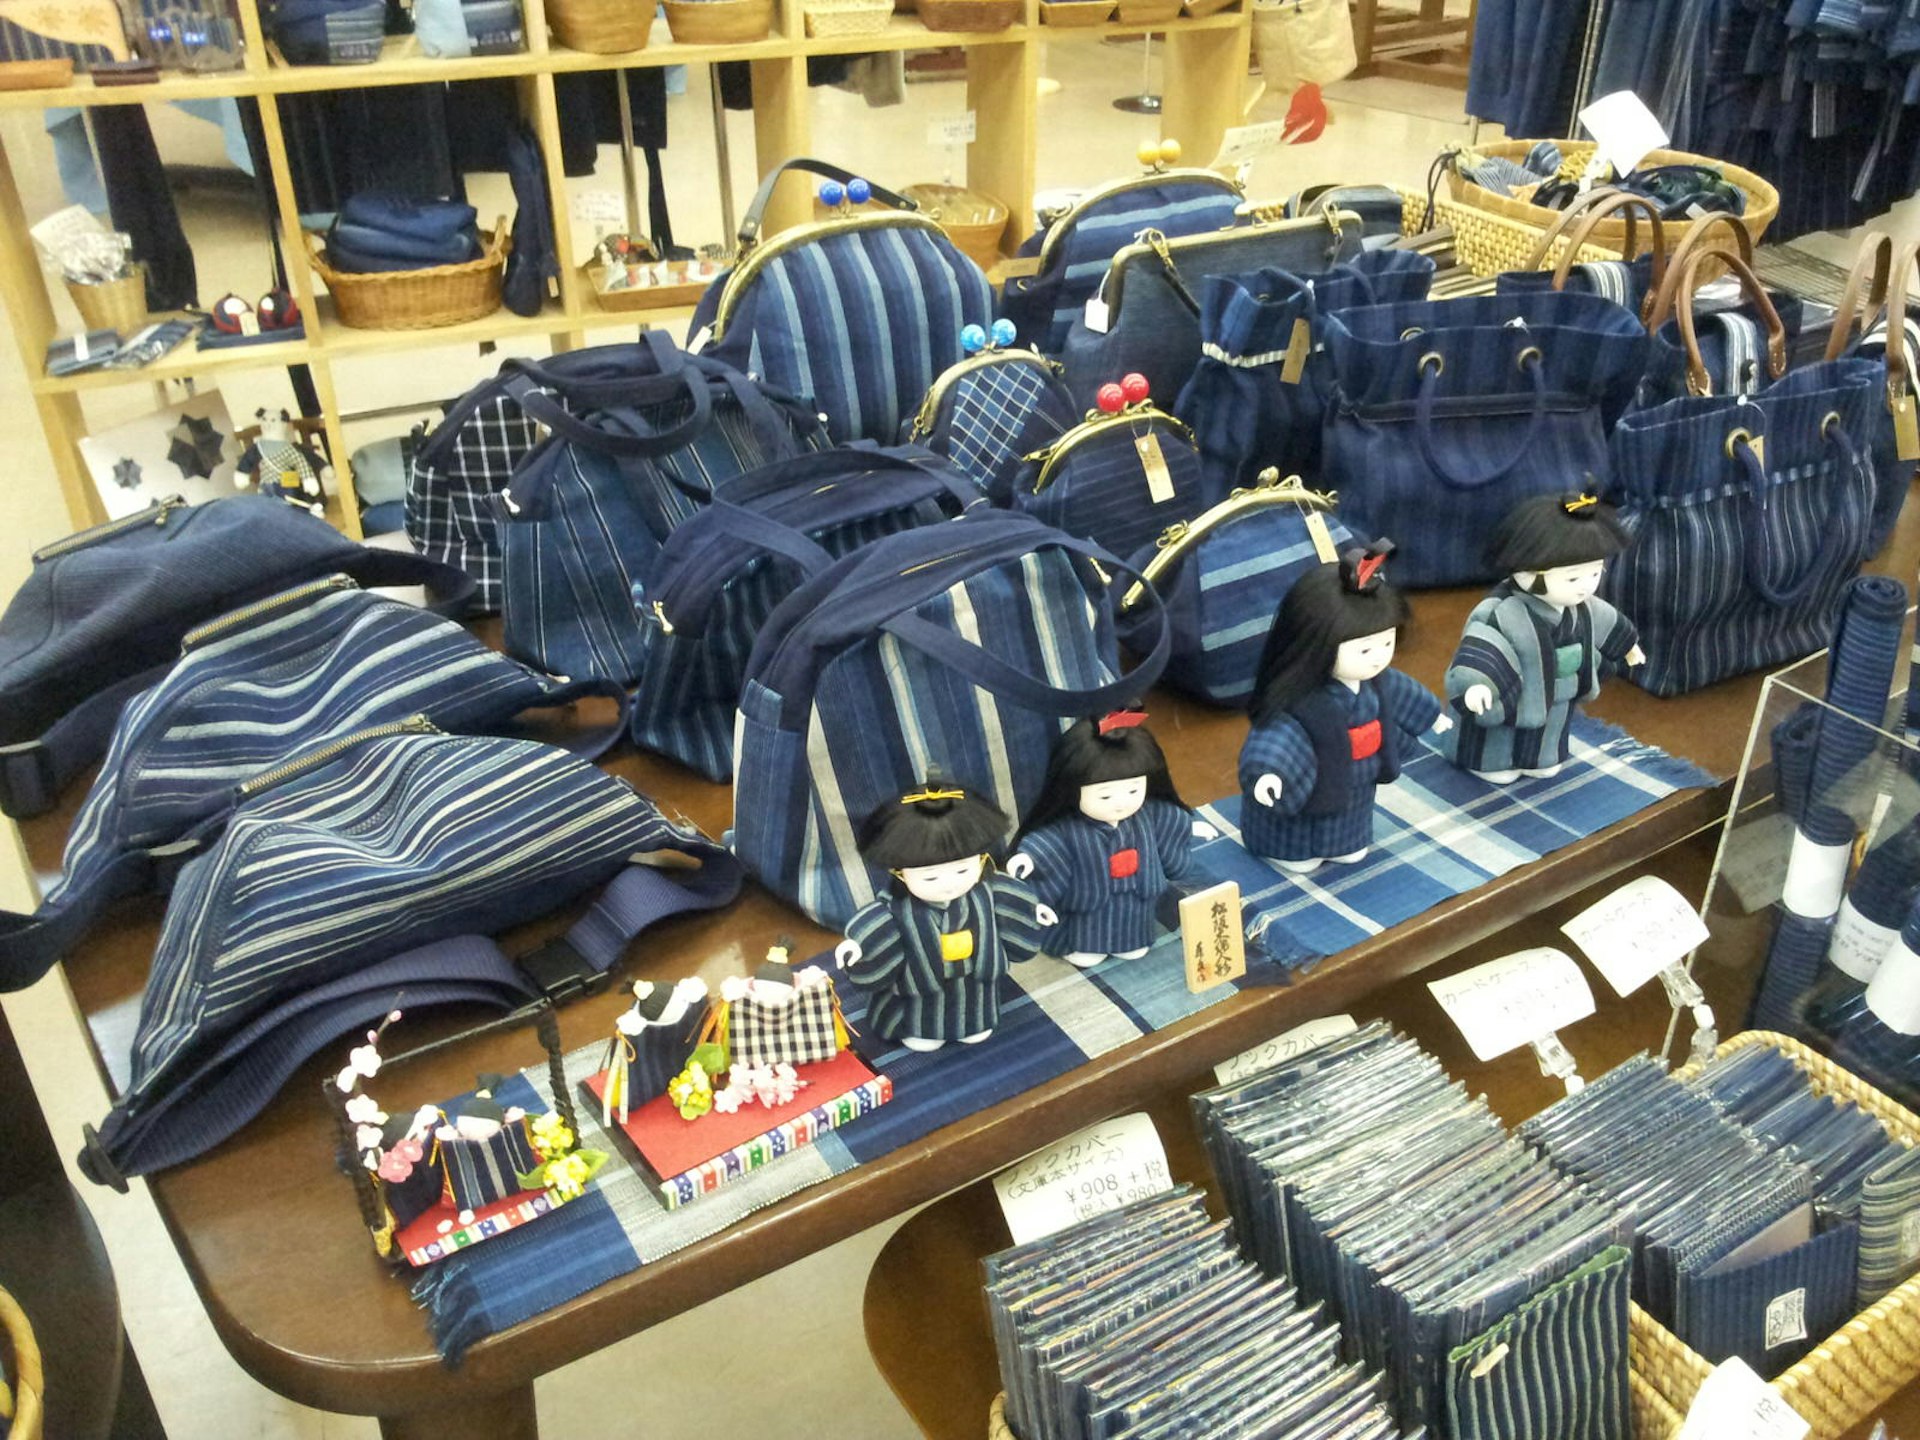 Accessories for sale at the Matsusaka Cotton Center